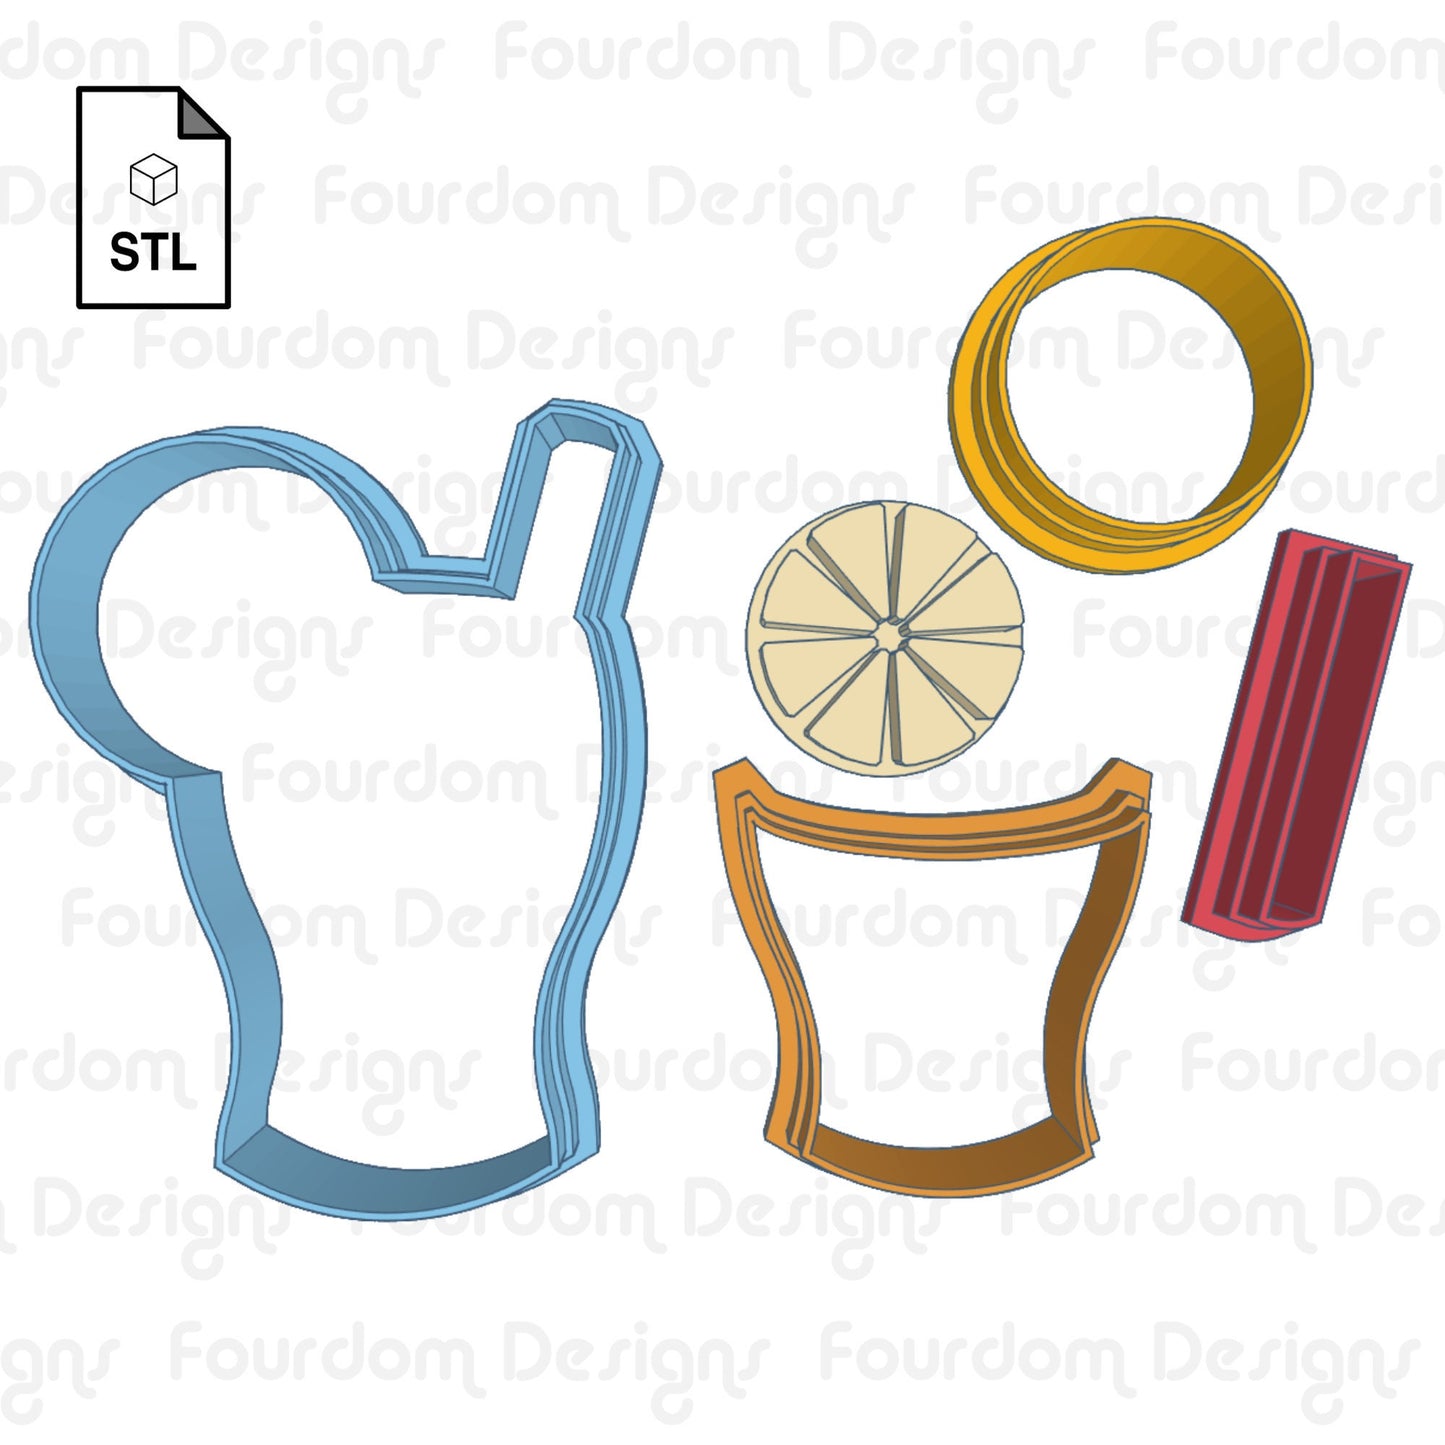 Cocktail Cookie Cutter Fondant Cutter Instant Digital Download STL File for 3D Printing